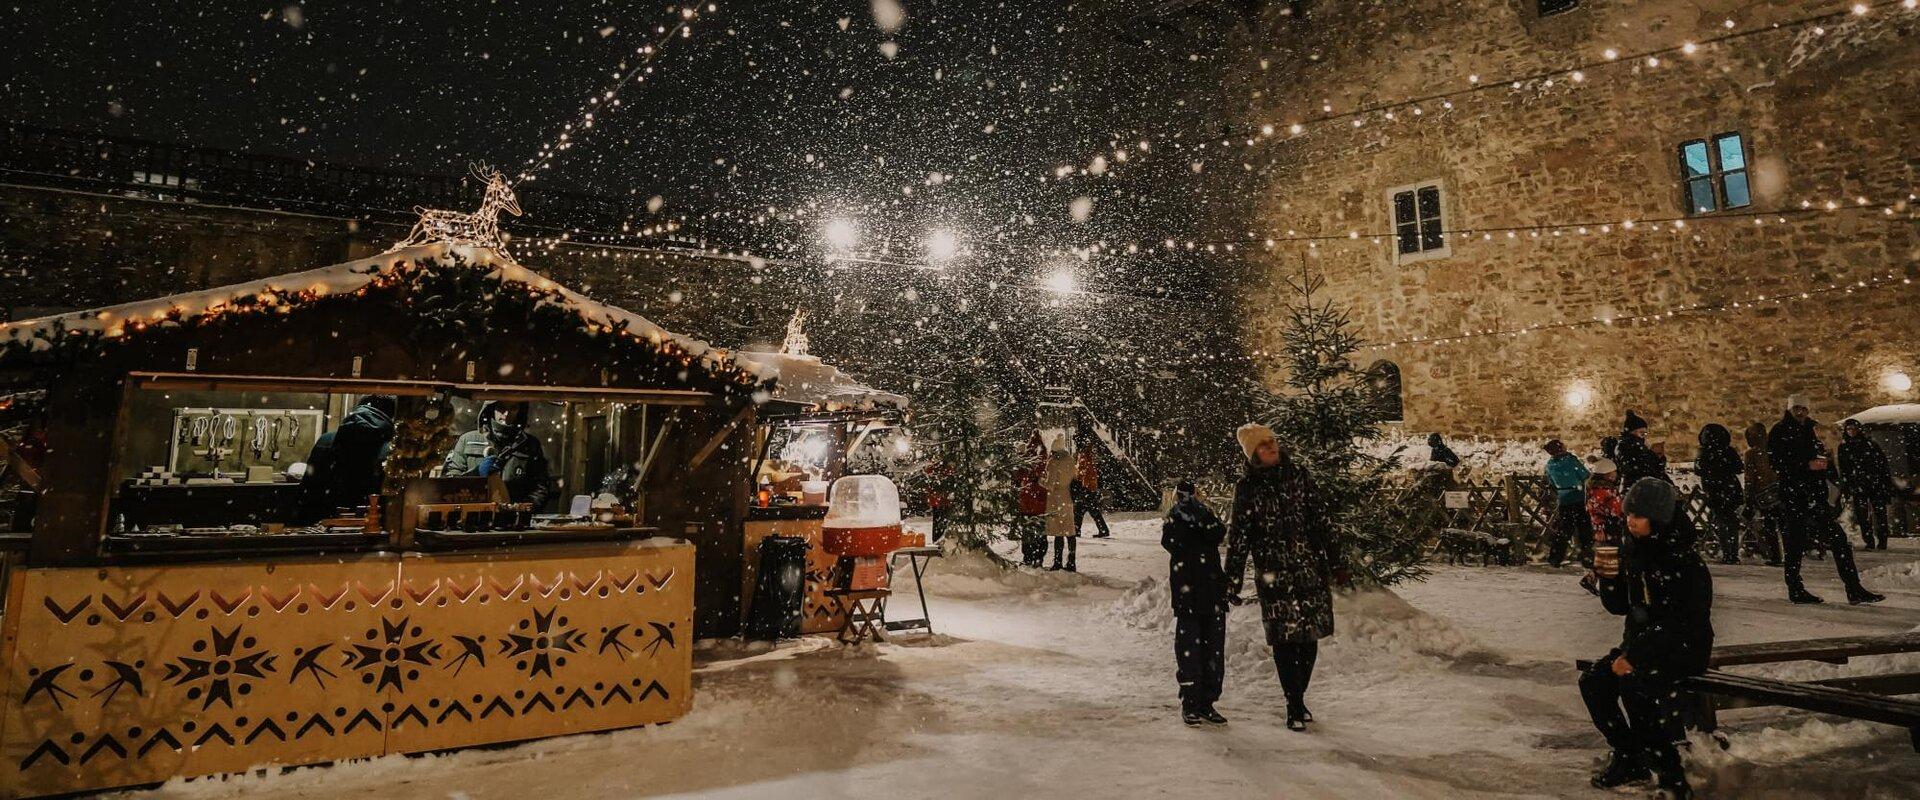 It is a tradition that the Christmas Village brings cozy Christmas mood and atmosphere to the city of Narva. The Christmas Village will open its gates